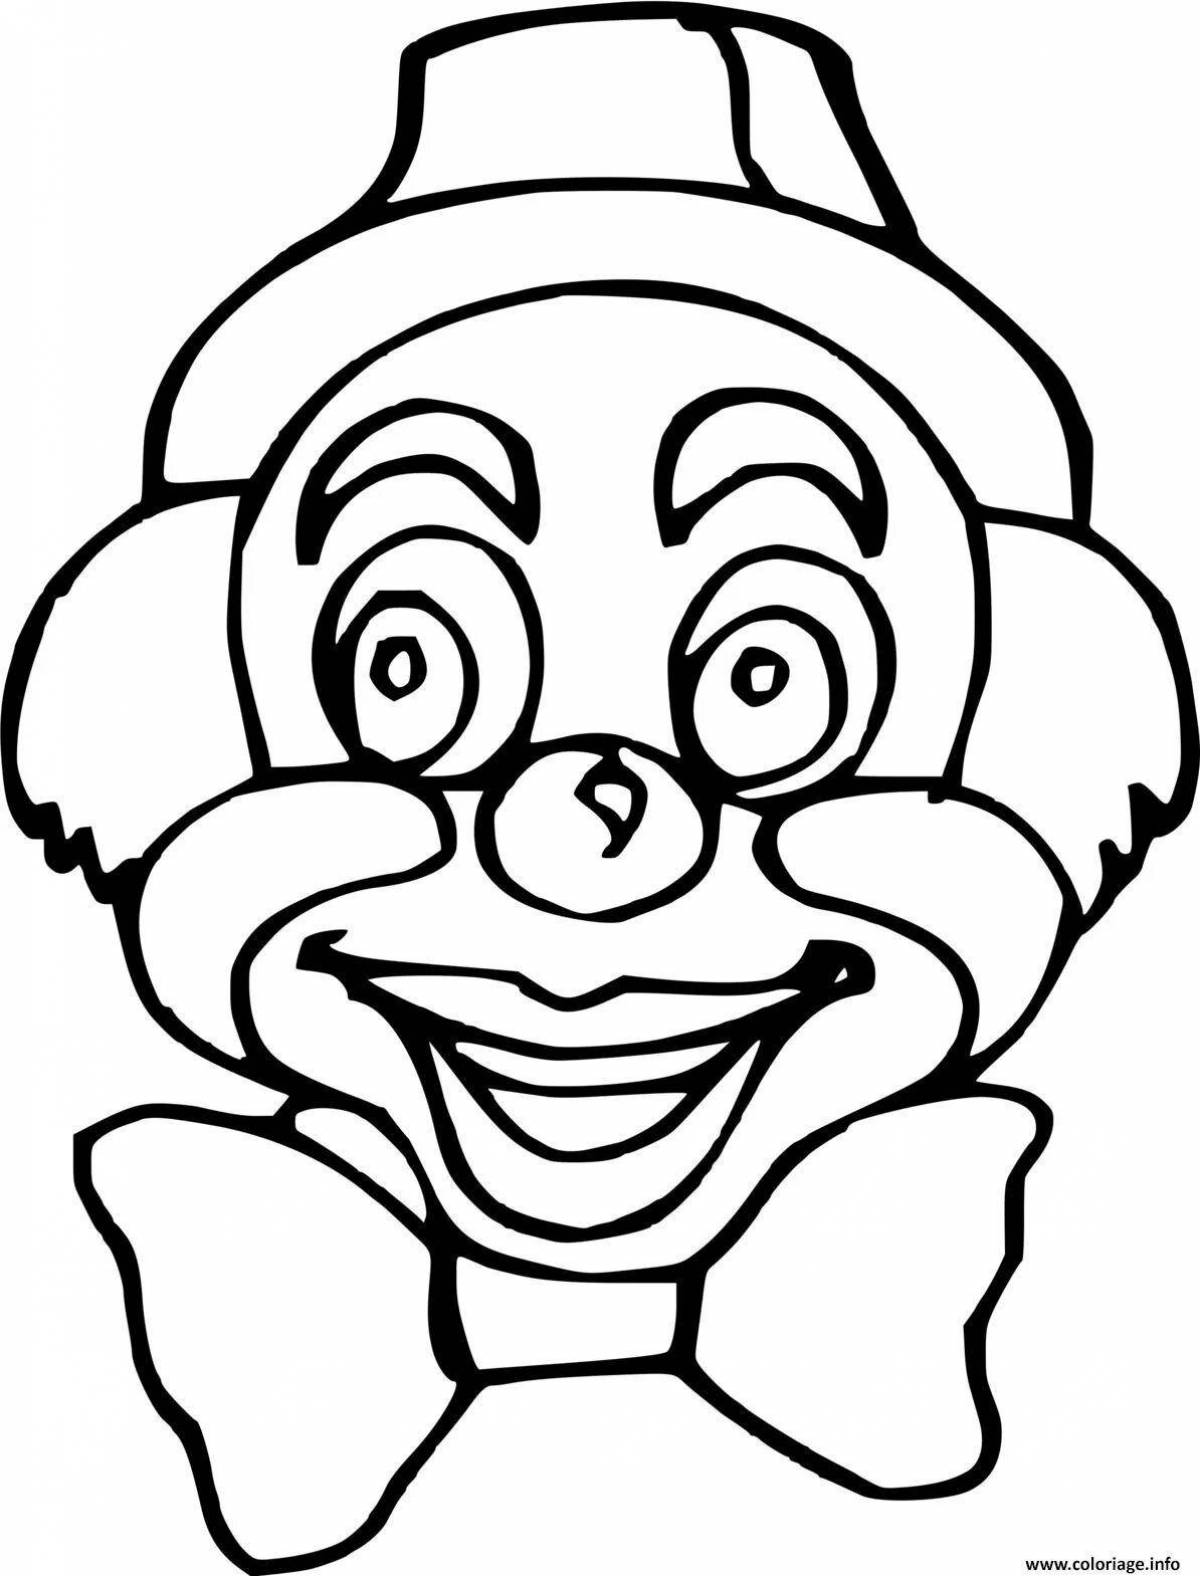 Live clown head coloring page